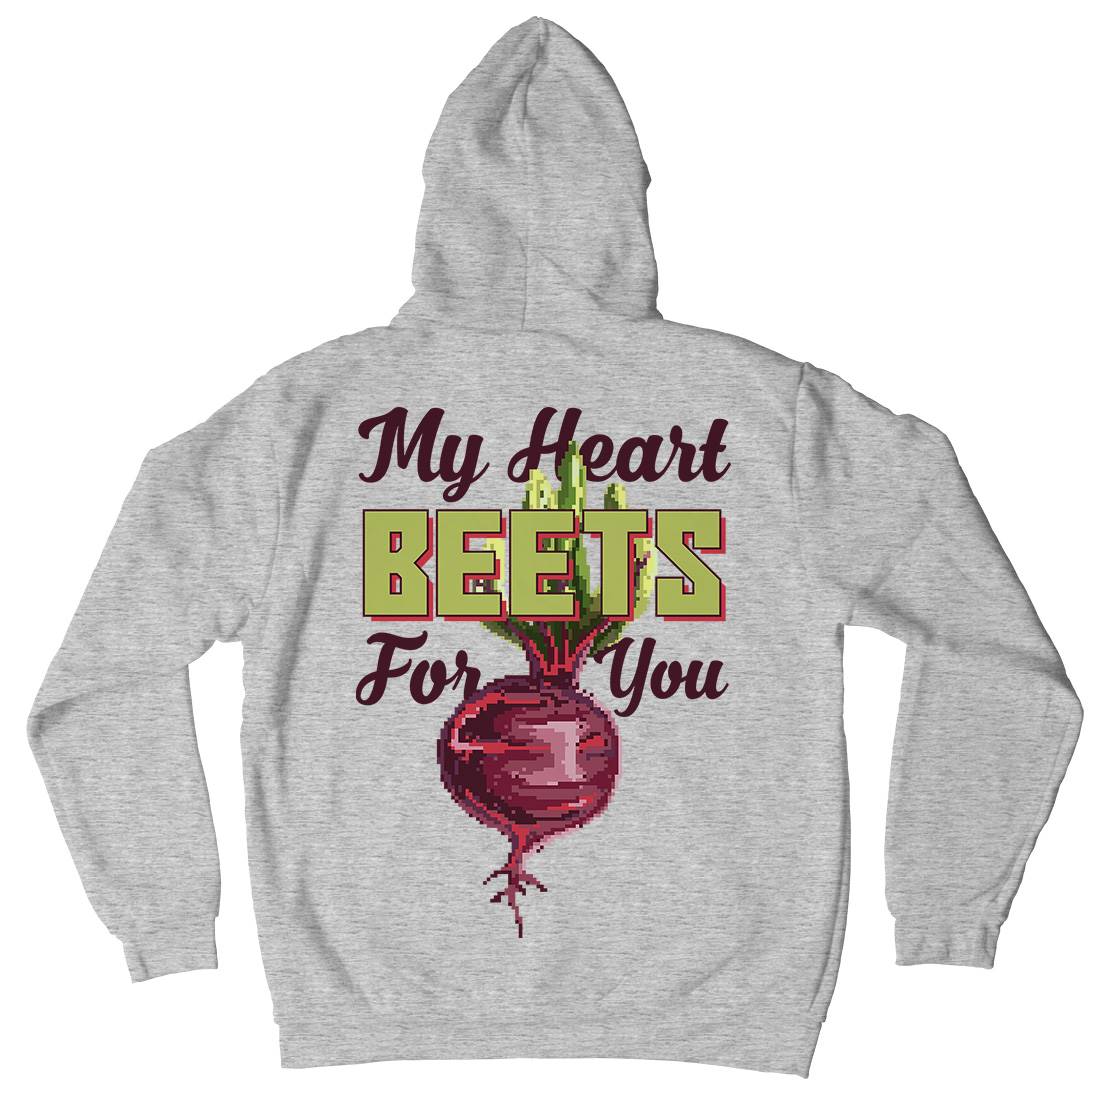 My Heart Beets For You Mens Hoodie With Pocket Food B937